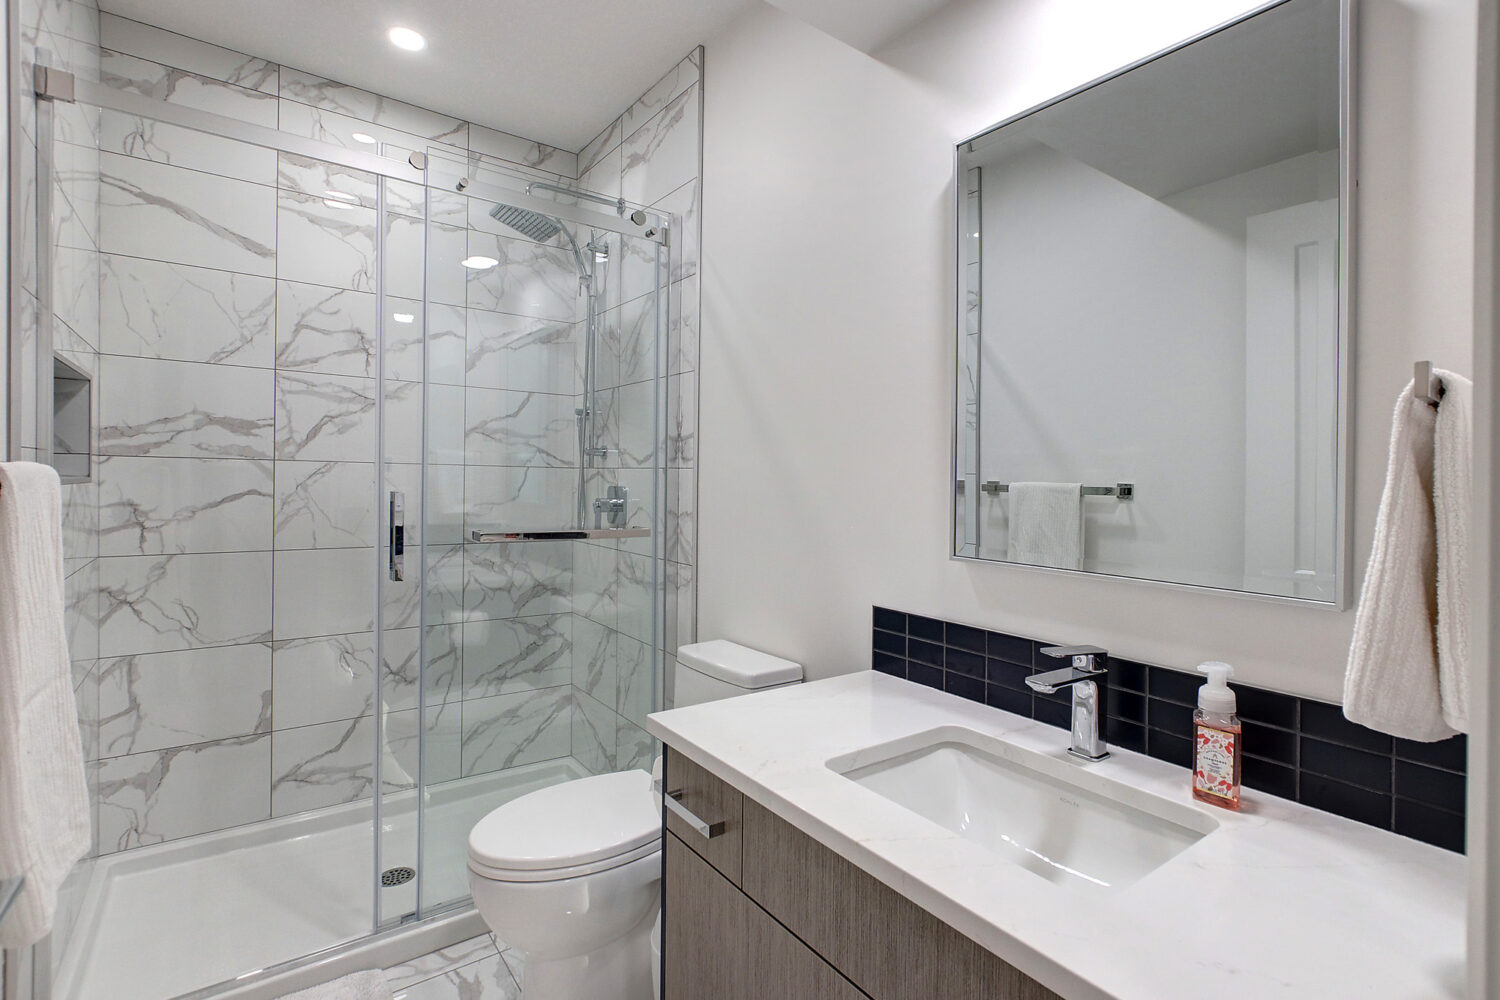 Bathroom Renovation With Marble Tile - Mode Built